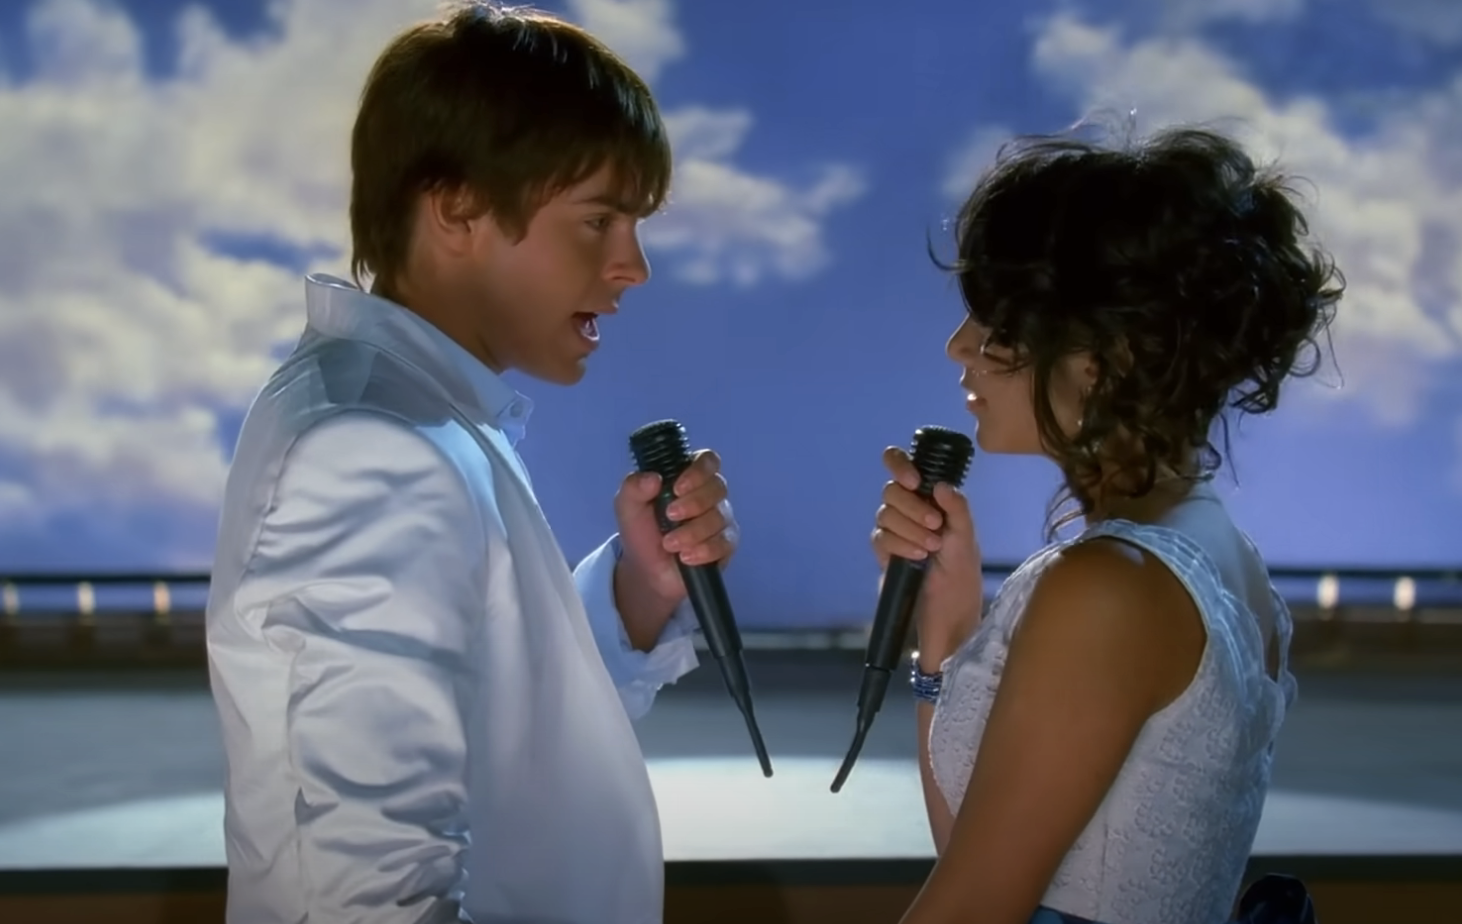 Two characters from High School Musical, a male and a female, singing together with microphones